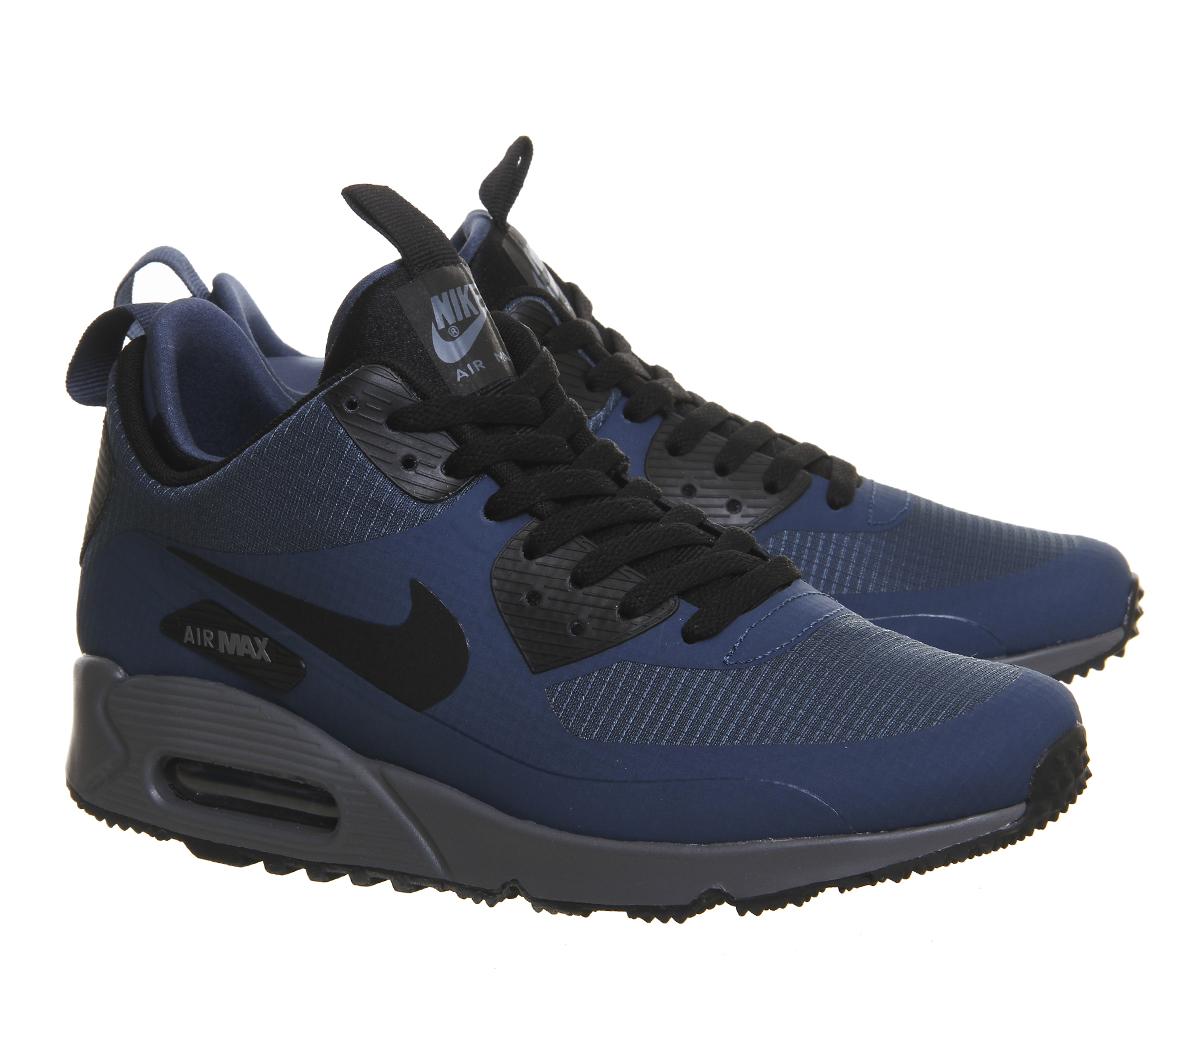 Nike Synthetic Air Max 90 Mid Winter in 